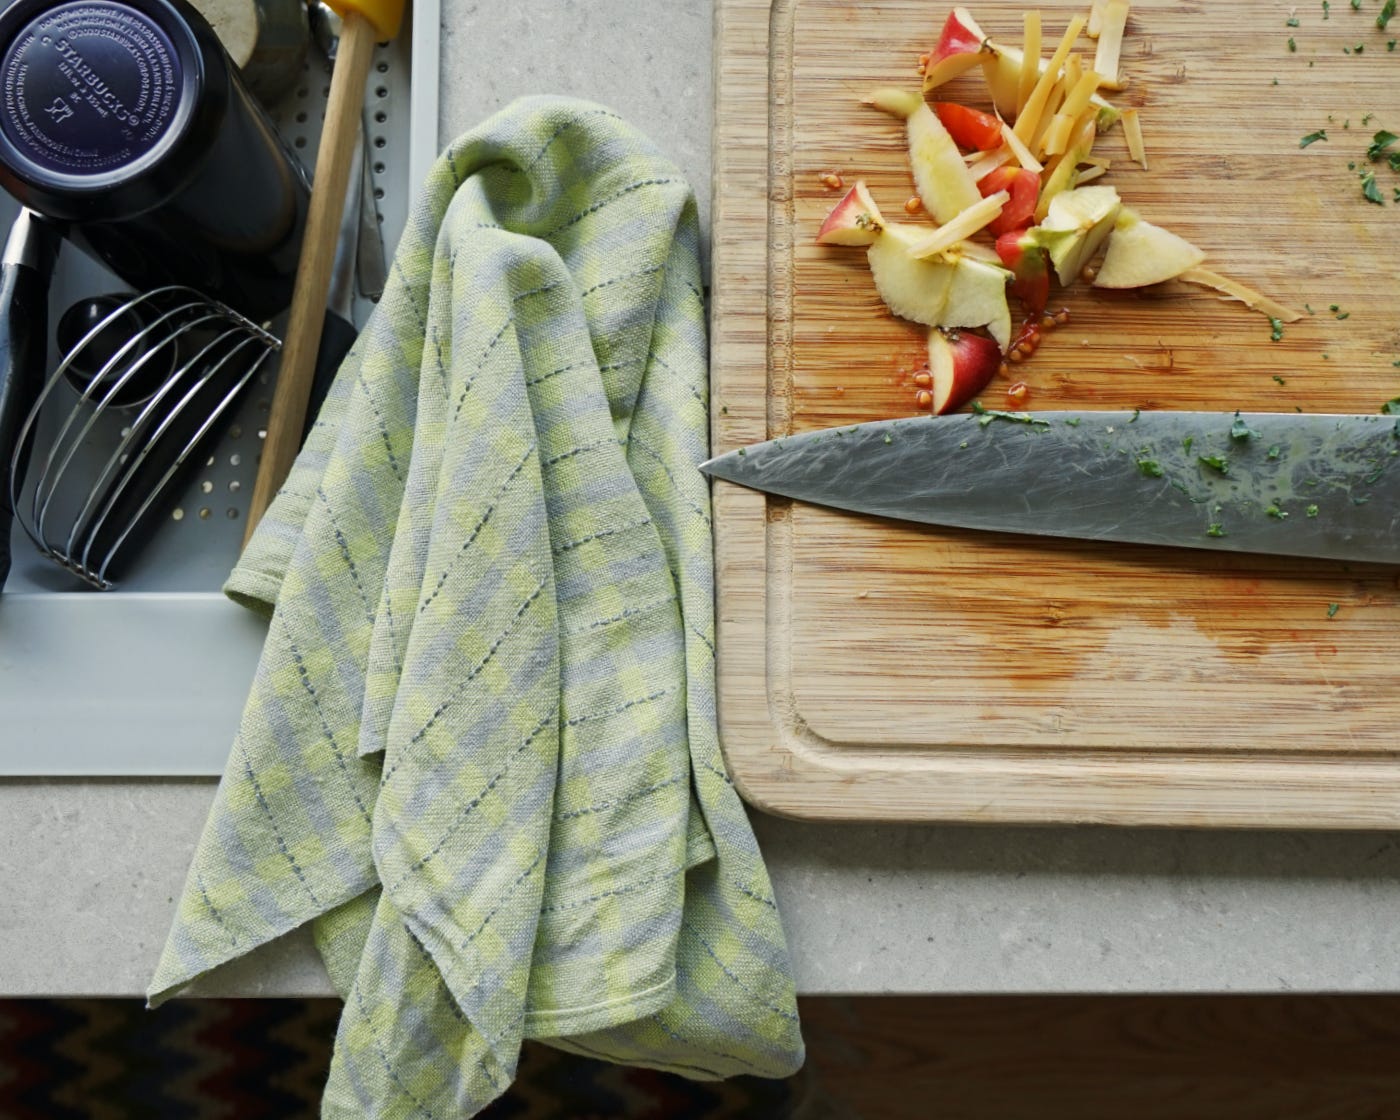 A folded cloth lying on a countertop. A cutting board and knife are to the right, with pieces of apple core, while a draining board with clean dishes is to the left